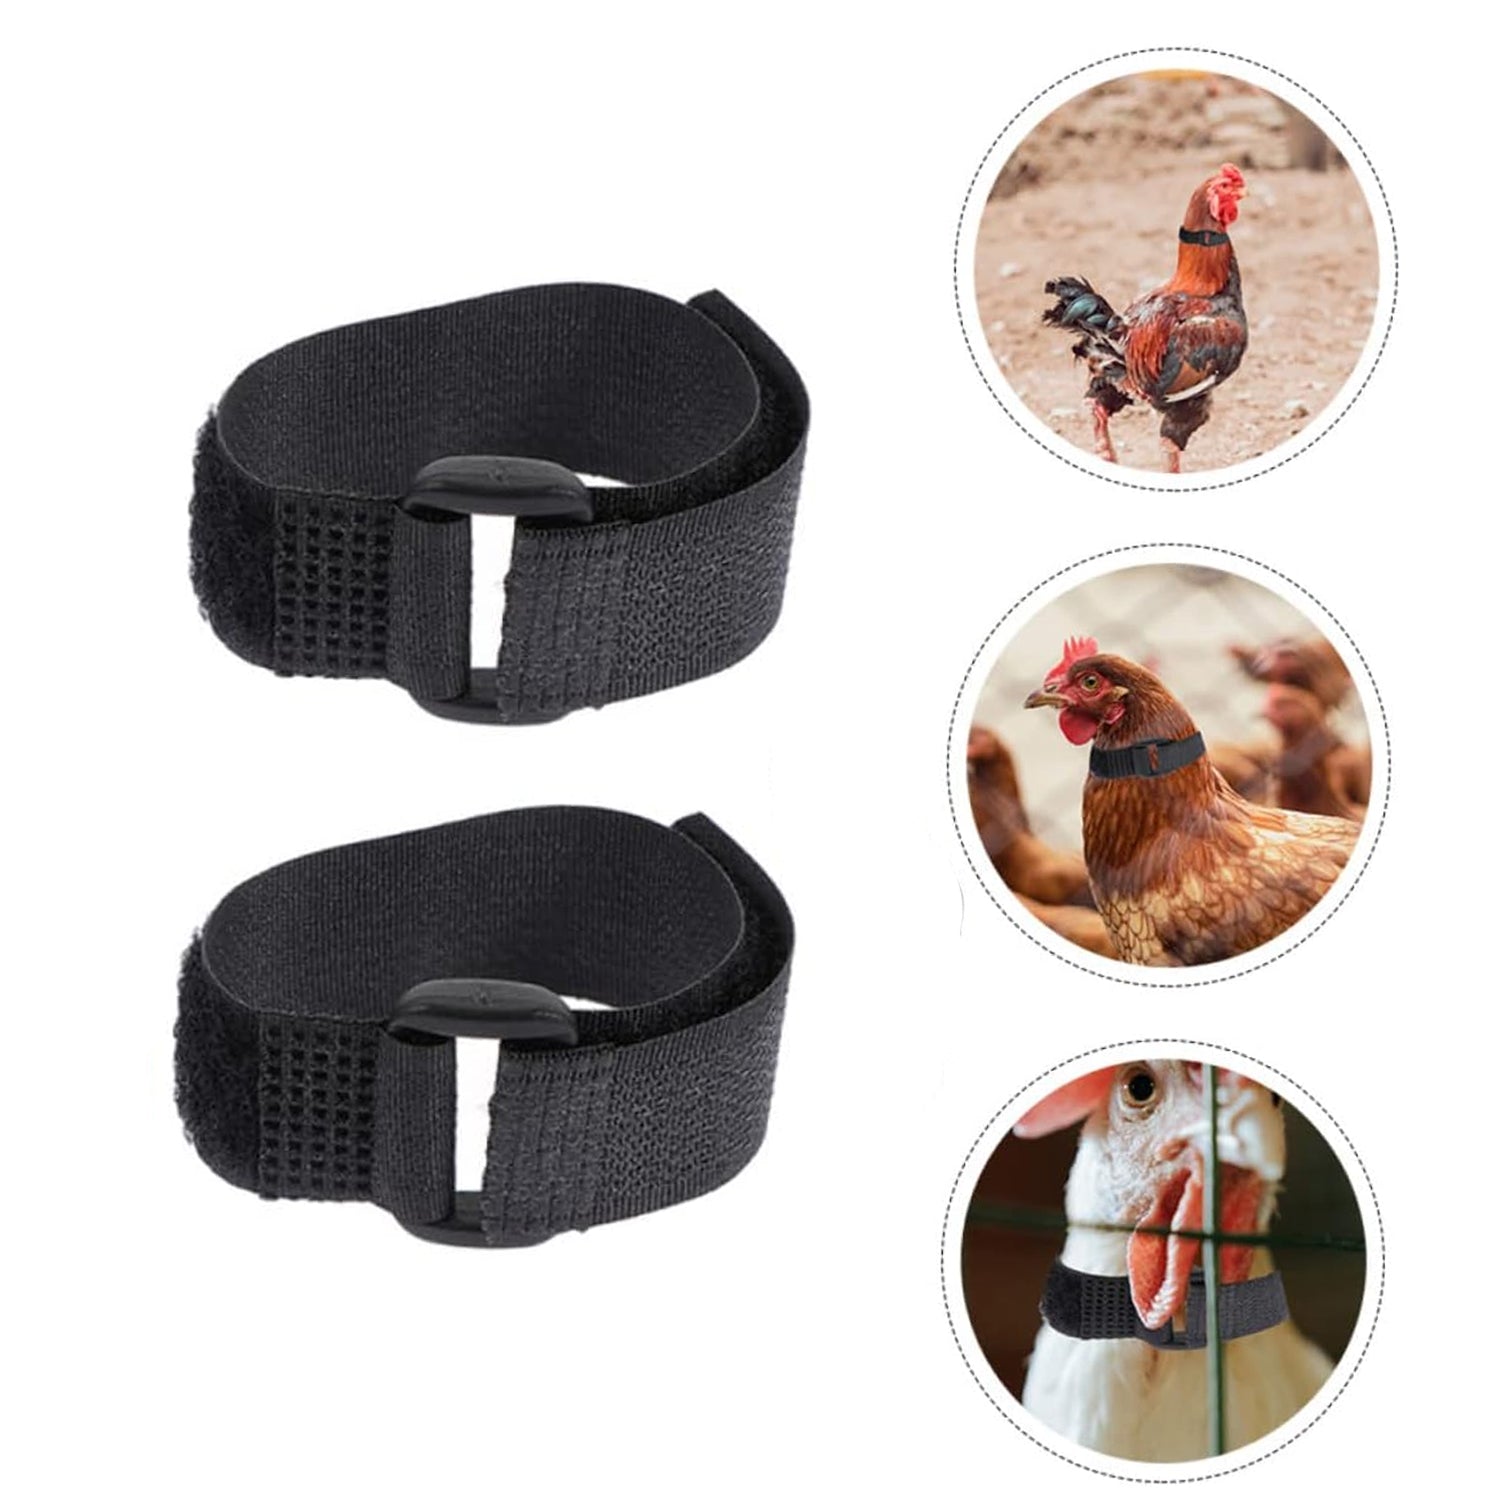 Anti Crow Collar for Roosters | 10Pcs No Crow Belt – ezonedeal